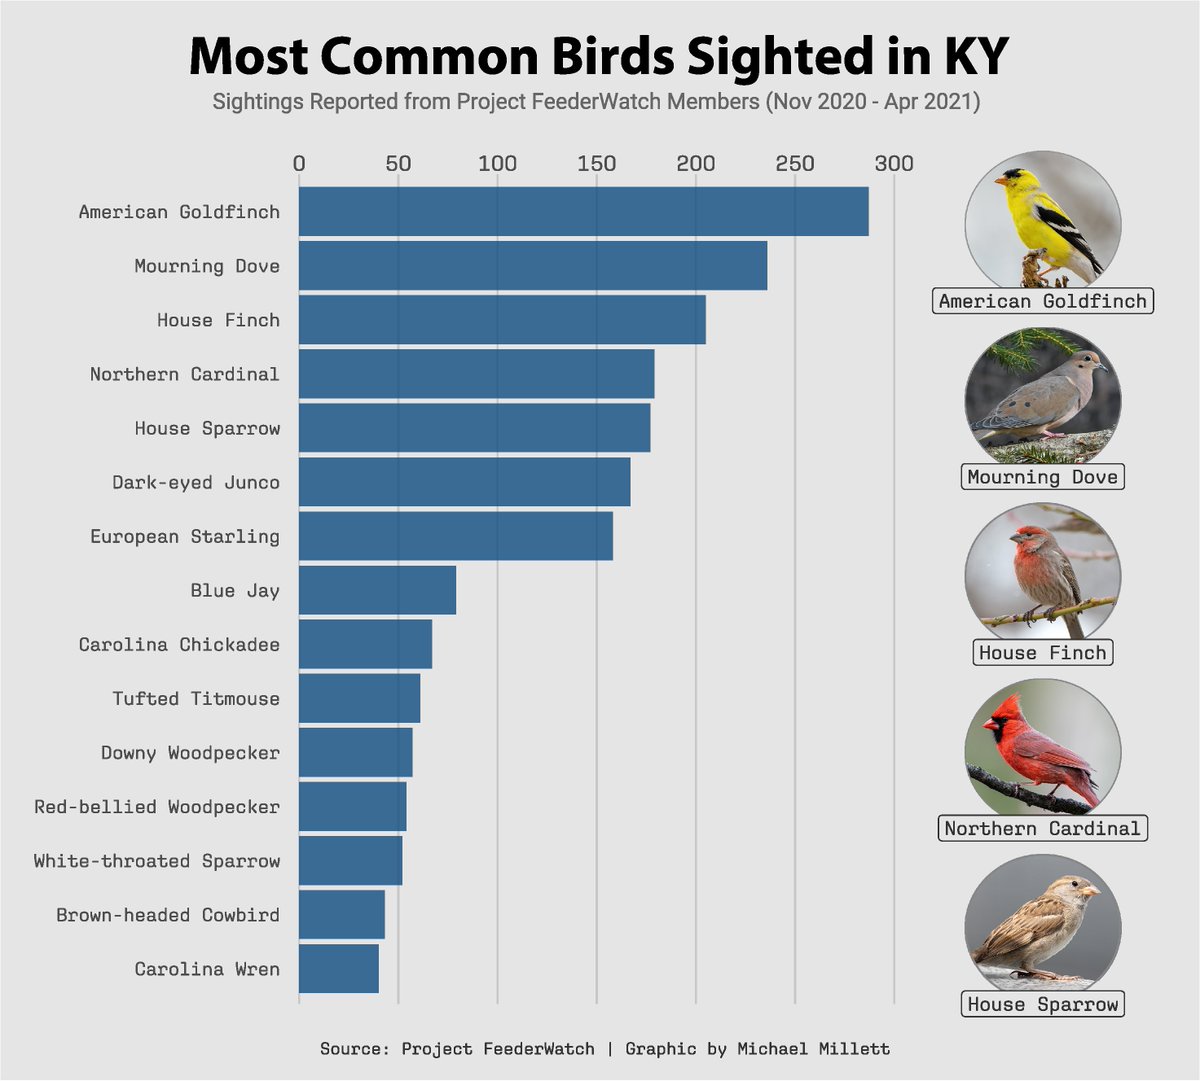 #TidyTuesday Week 2 - Bird Sightings Reported from Project FeederWatch Members

A bar graph showing the most common bird species spotted in KY from PFW members - Have you seen any of these birds?

Code: github.com/michael-millet…

#r4ds #ggplot #dataviz #rstats #posit